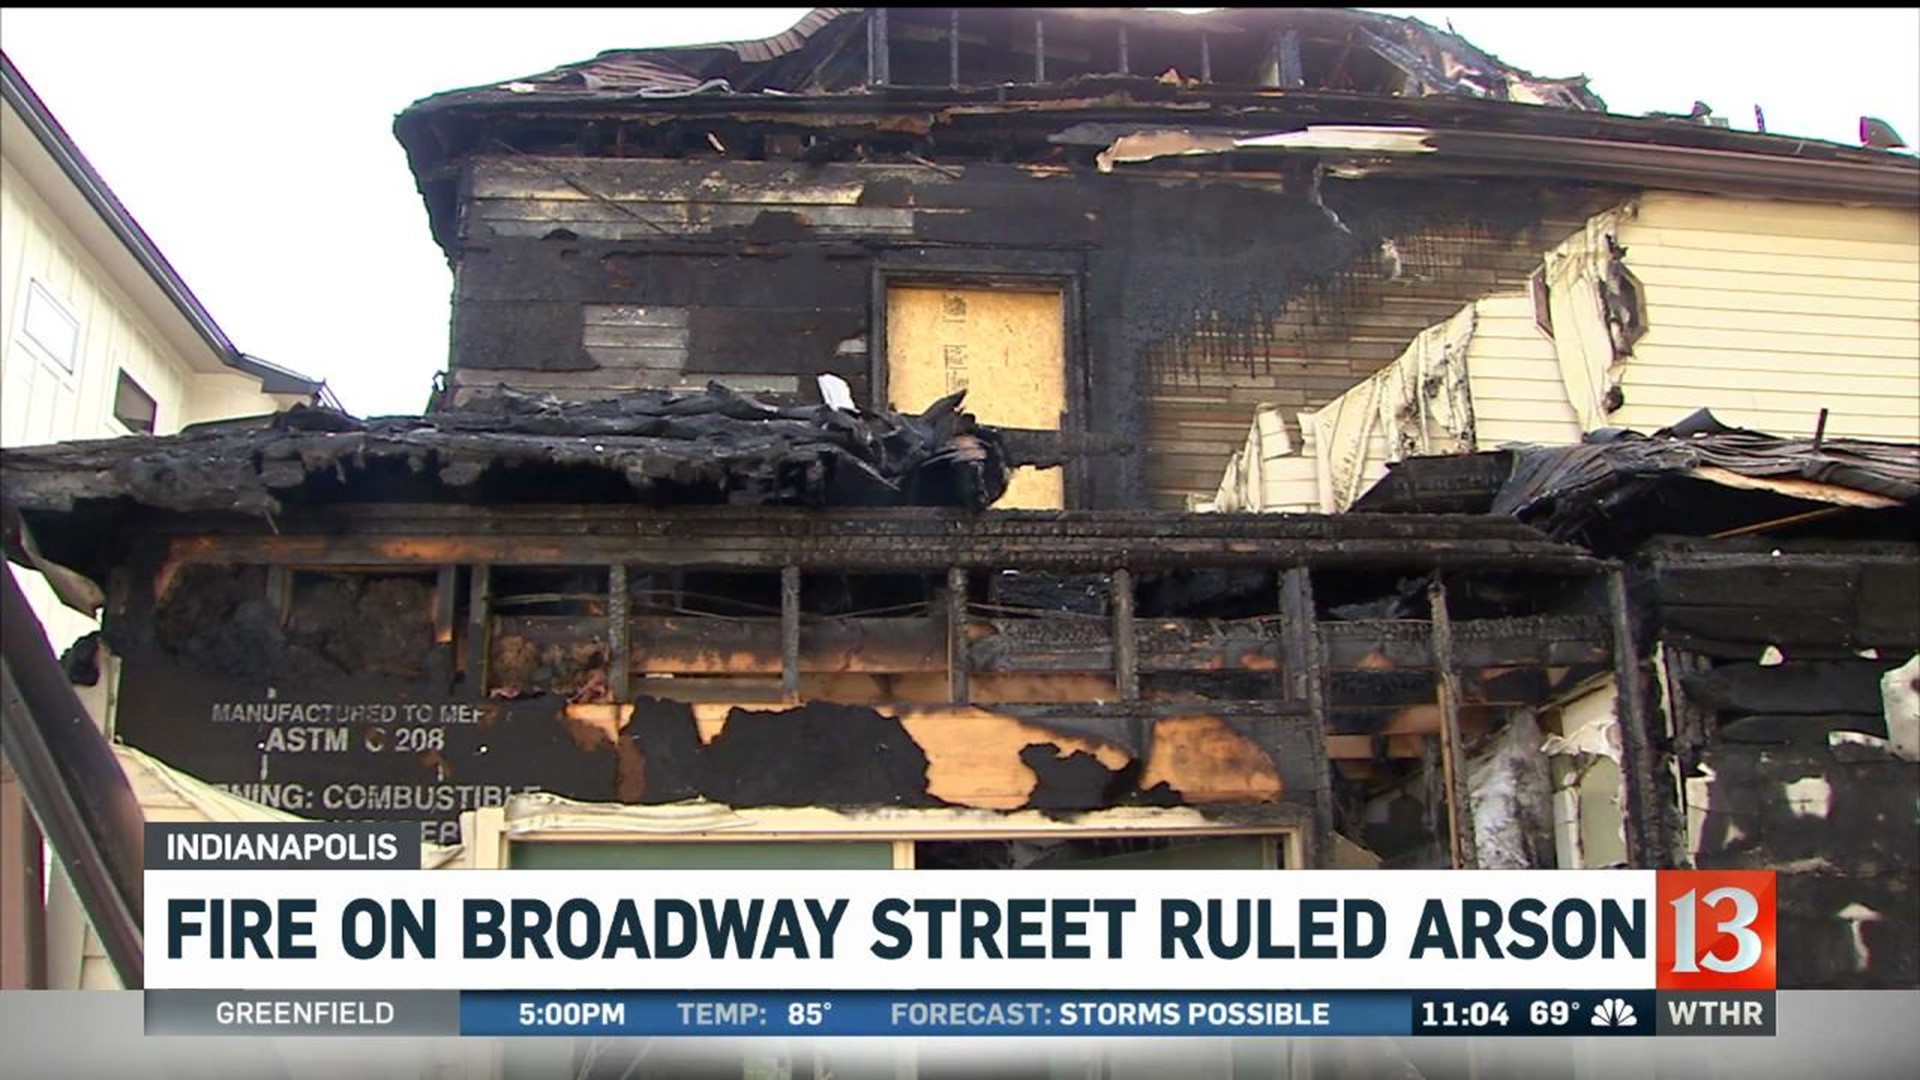 Fire on Broadway Street ruled arson